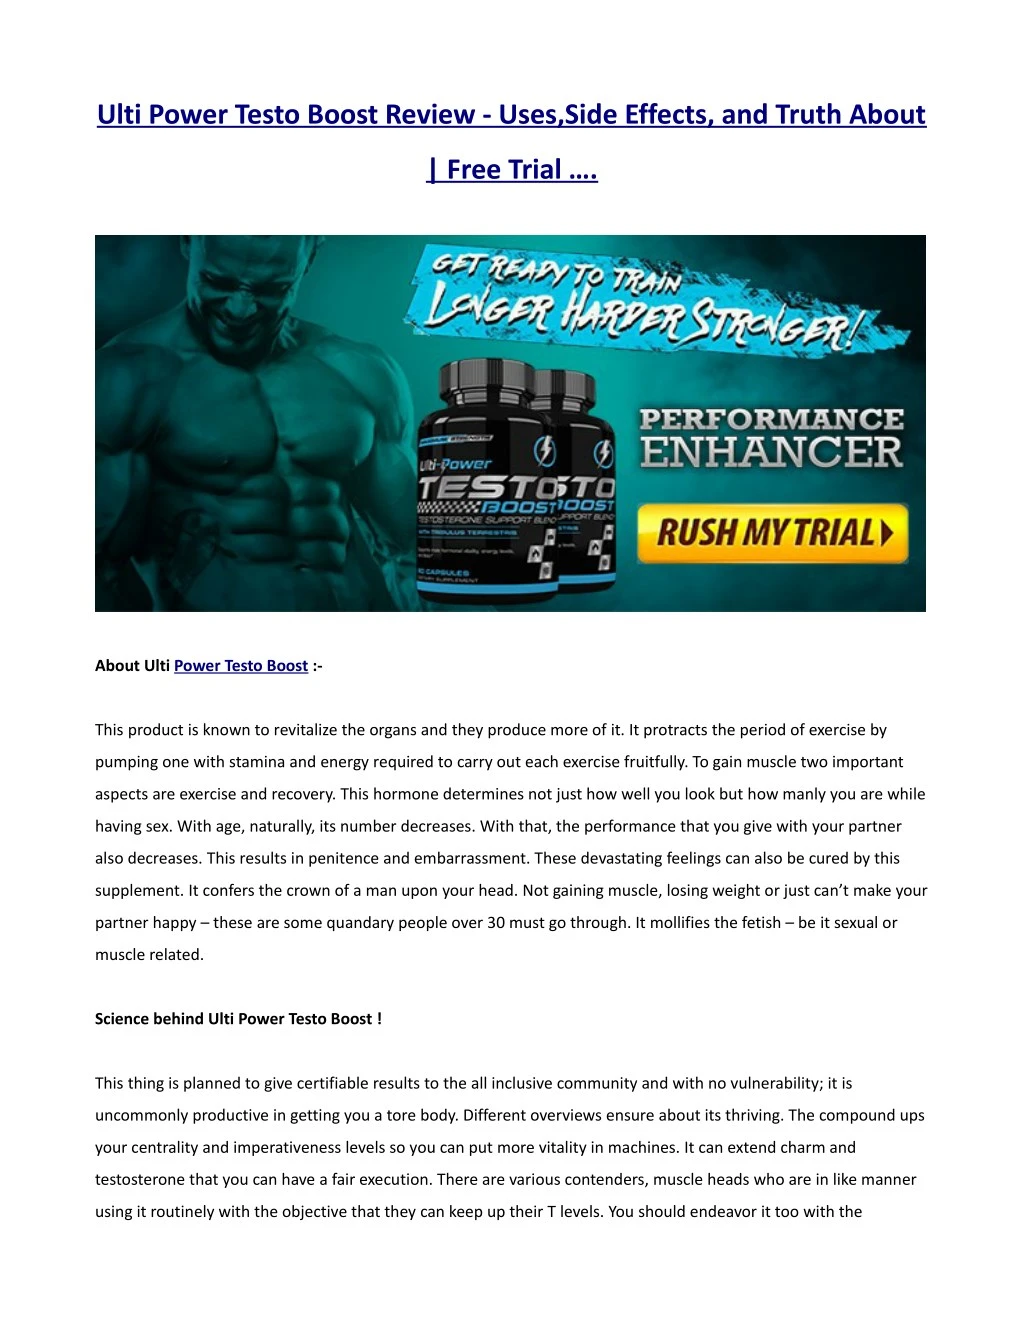 ulti power testo boost review uses side effects n.